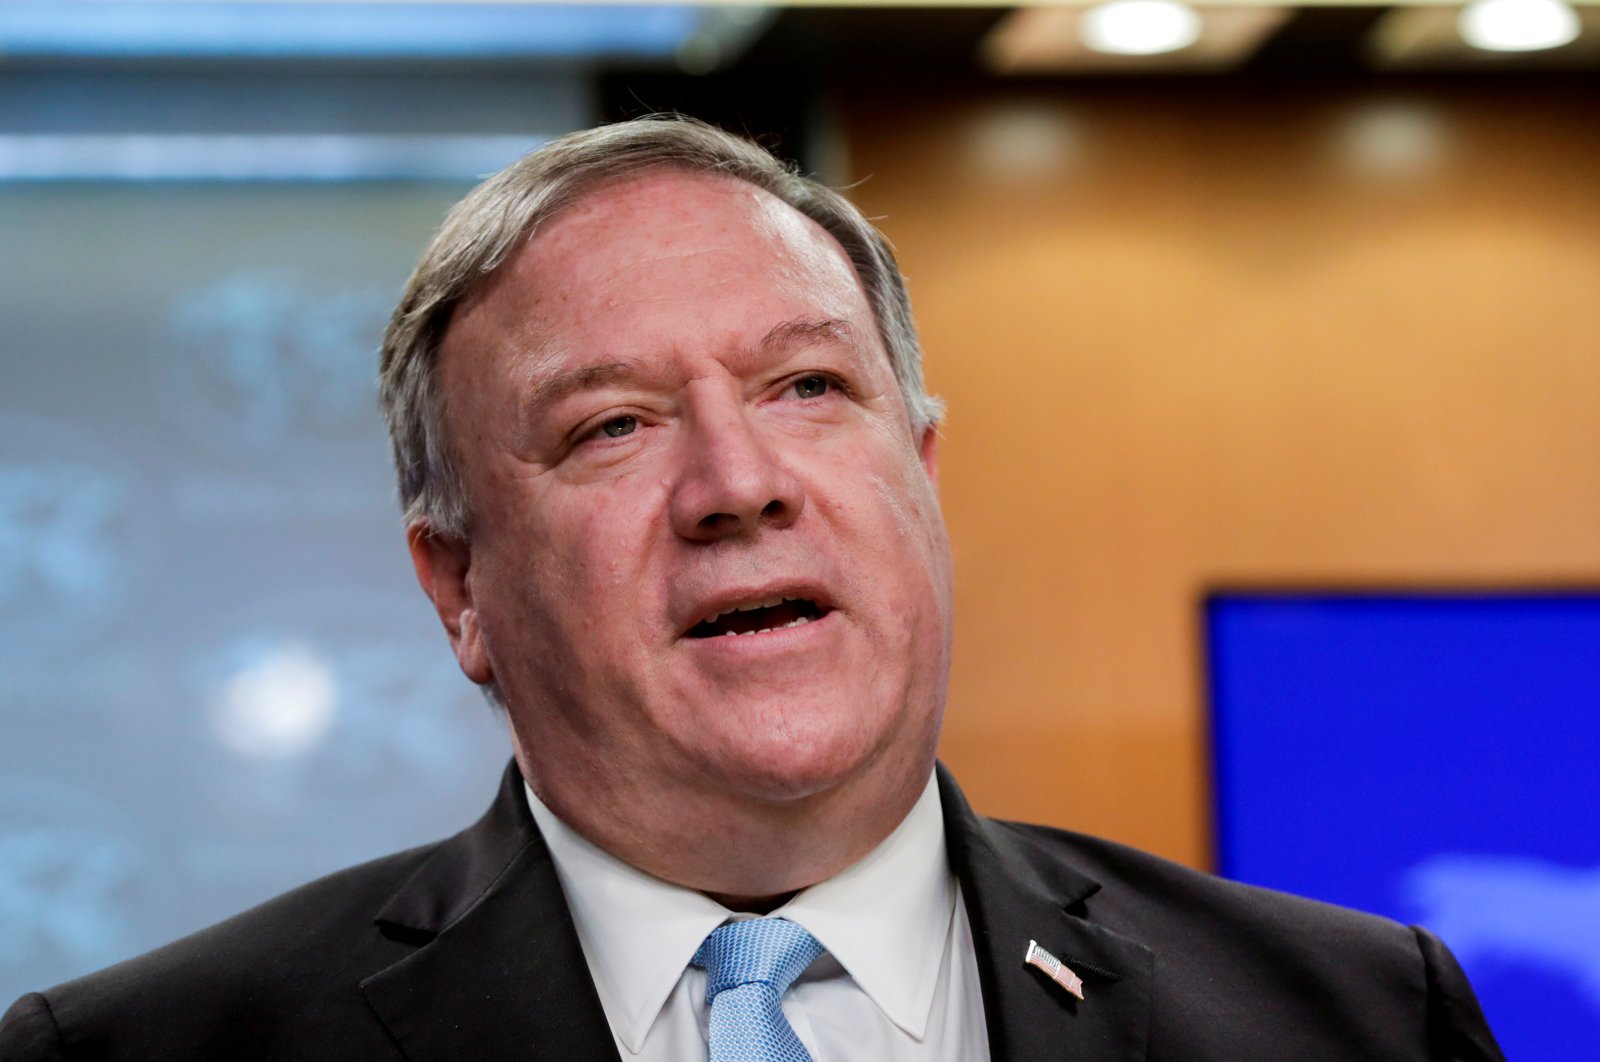 U.S. Secretary of State Mike Pompeo speaks during a joint briefing at the State Department, Washington, June 11, 2020. (REUTERS Photo)